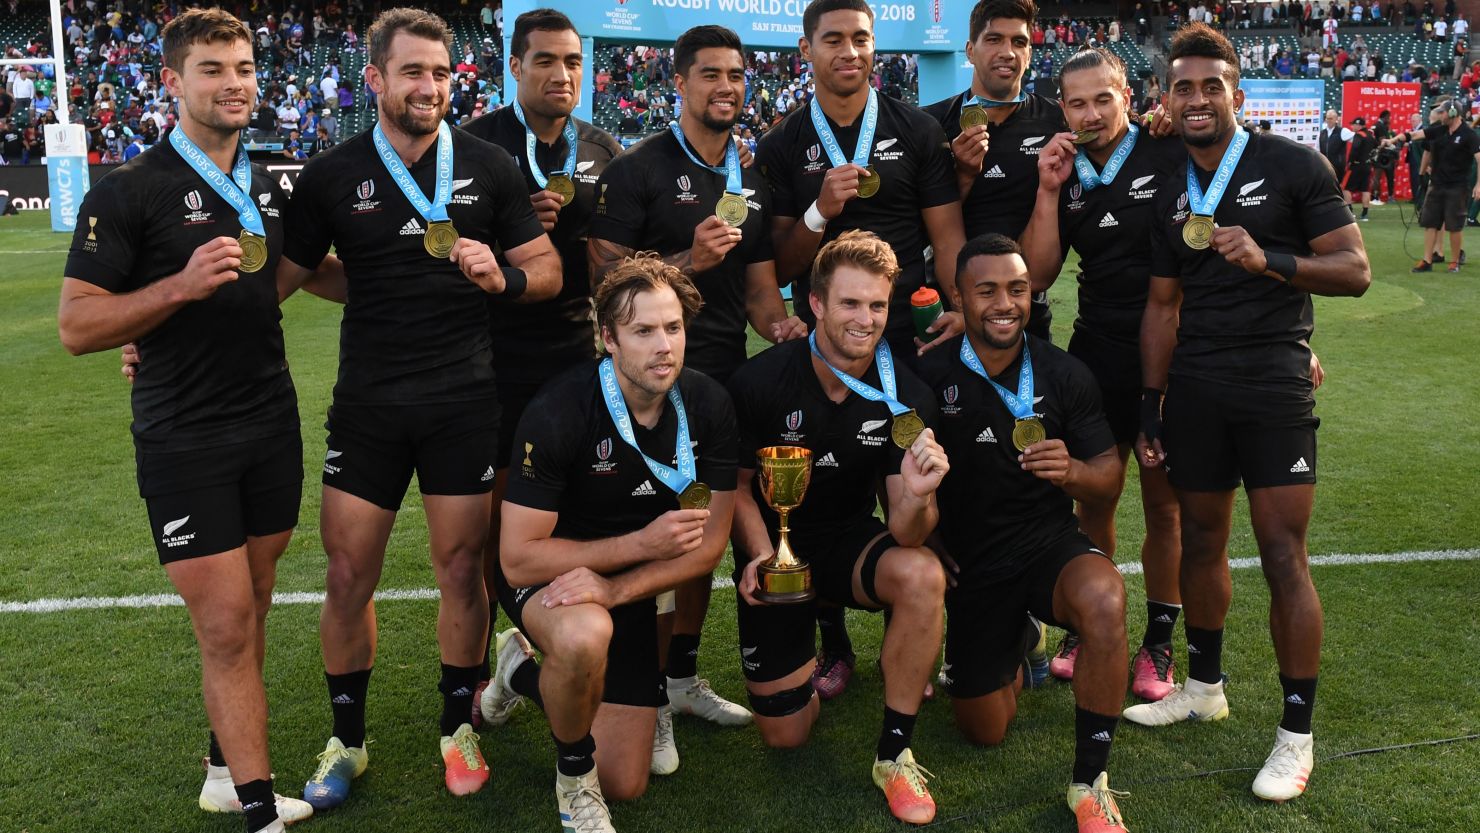 The All Blacks Sevens defeated England to win the Rugby World Cup Sevens in San Francisco.  